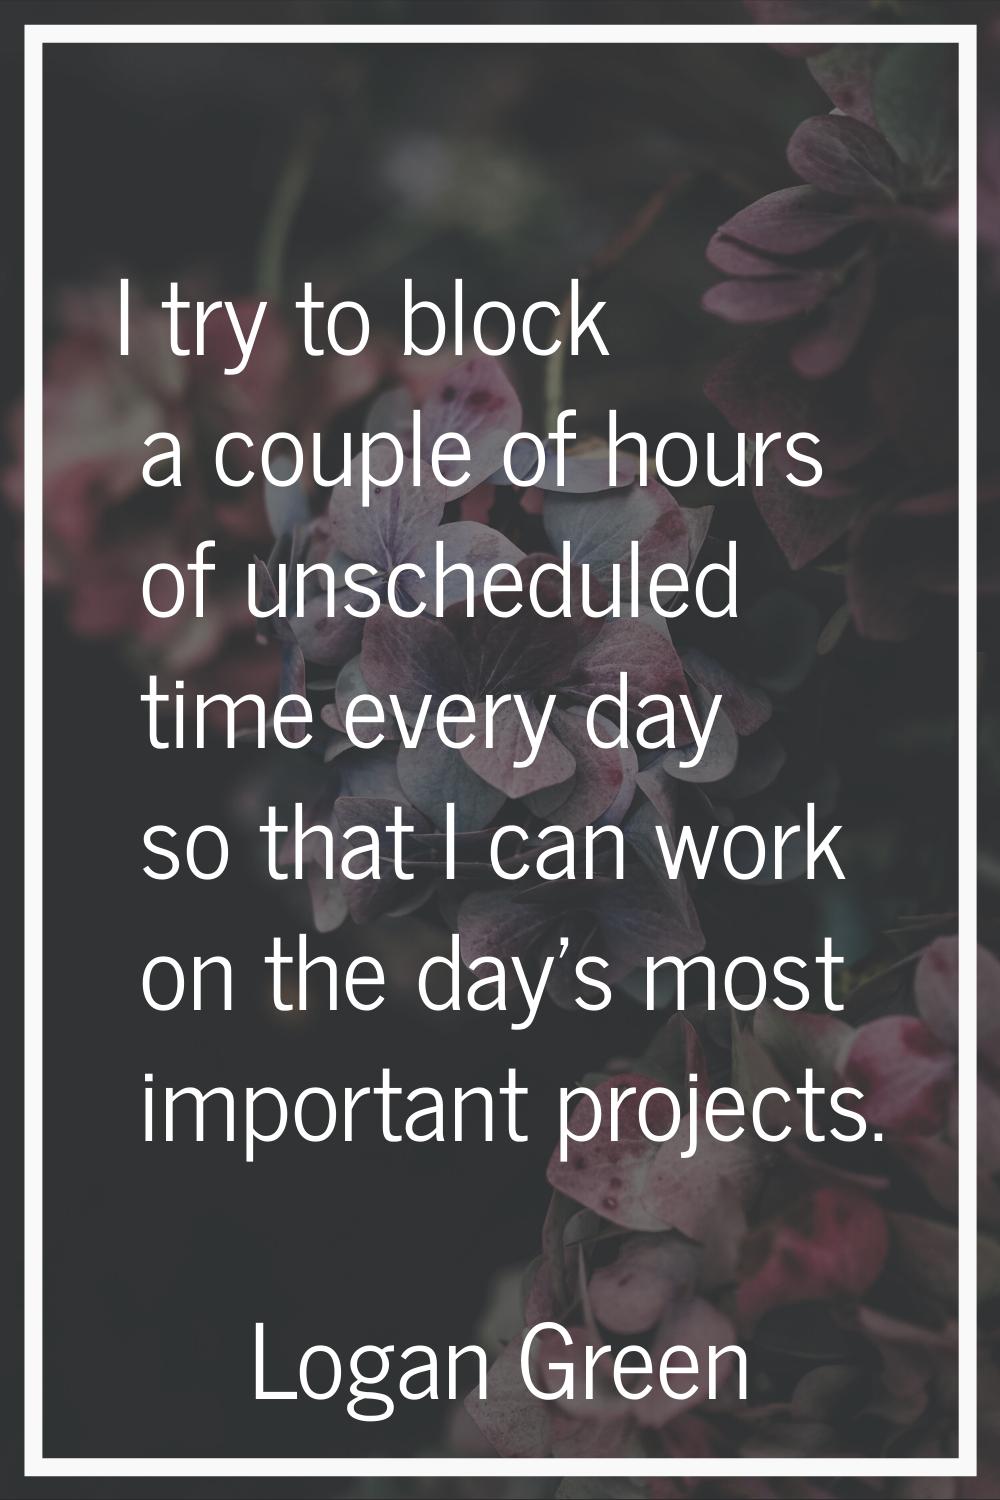 I try to block a couple of hours of unscheduled time every day so that I can work on the day's most